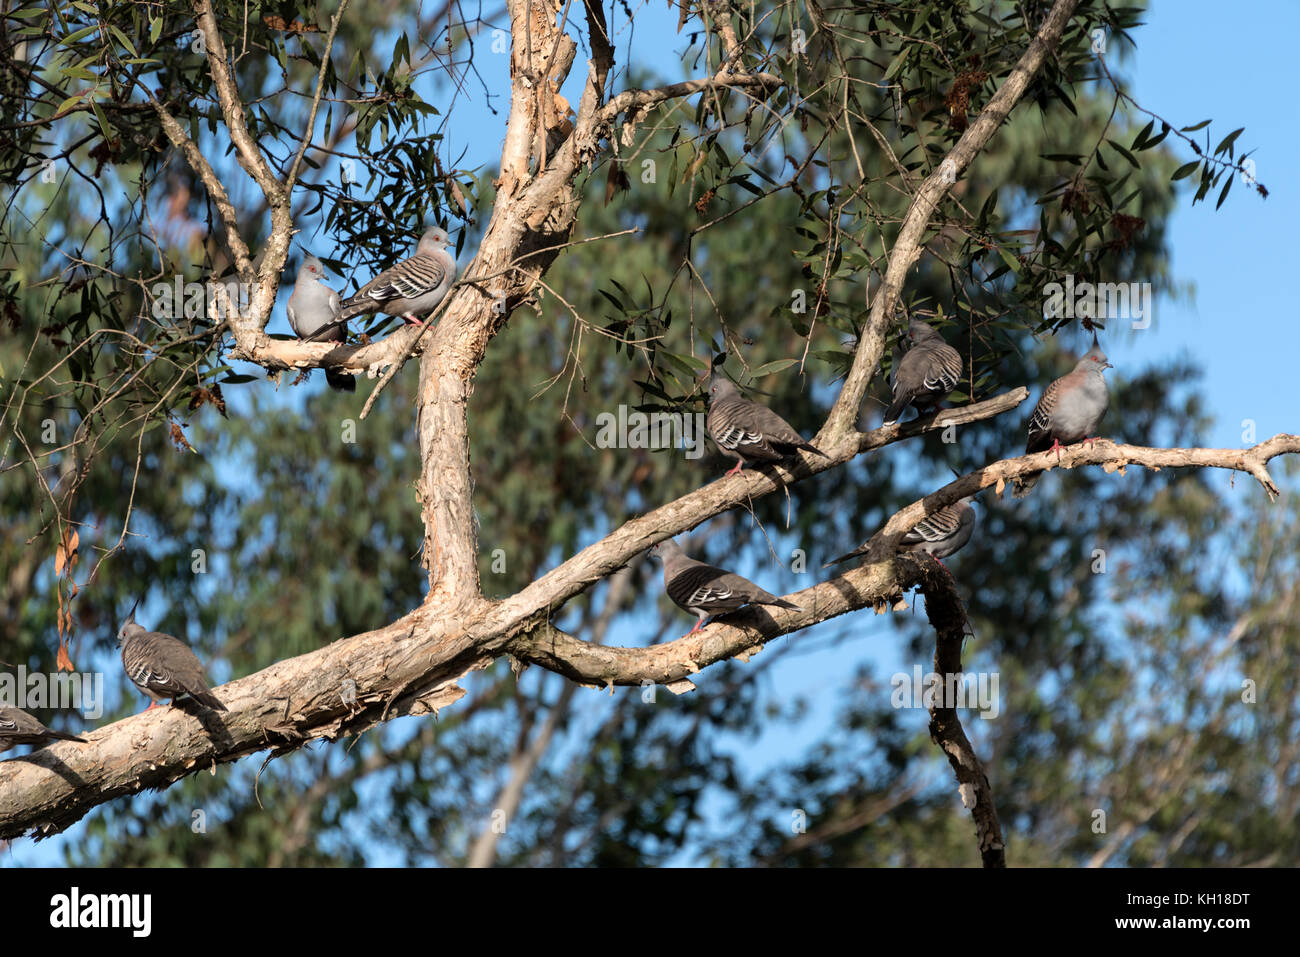 A flock of Crested Pigeons or Australian pigeon. It  is a native of Australia. Stock Photo